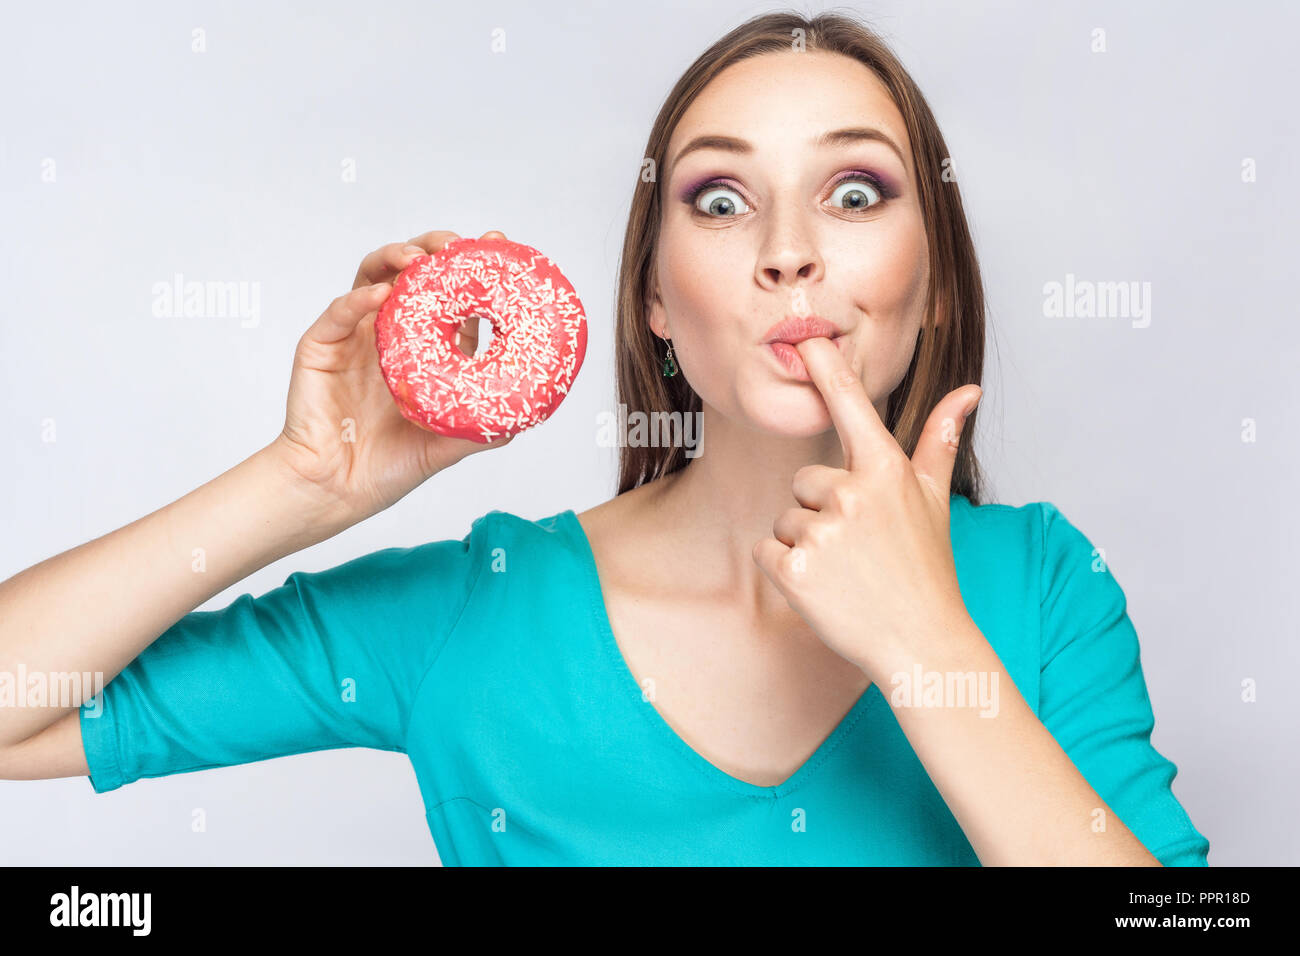 Portrait Of Crazy Young Beautiful Girl In Blue Blouse Standing Holding And Showing Pink Donut 